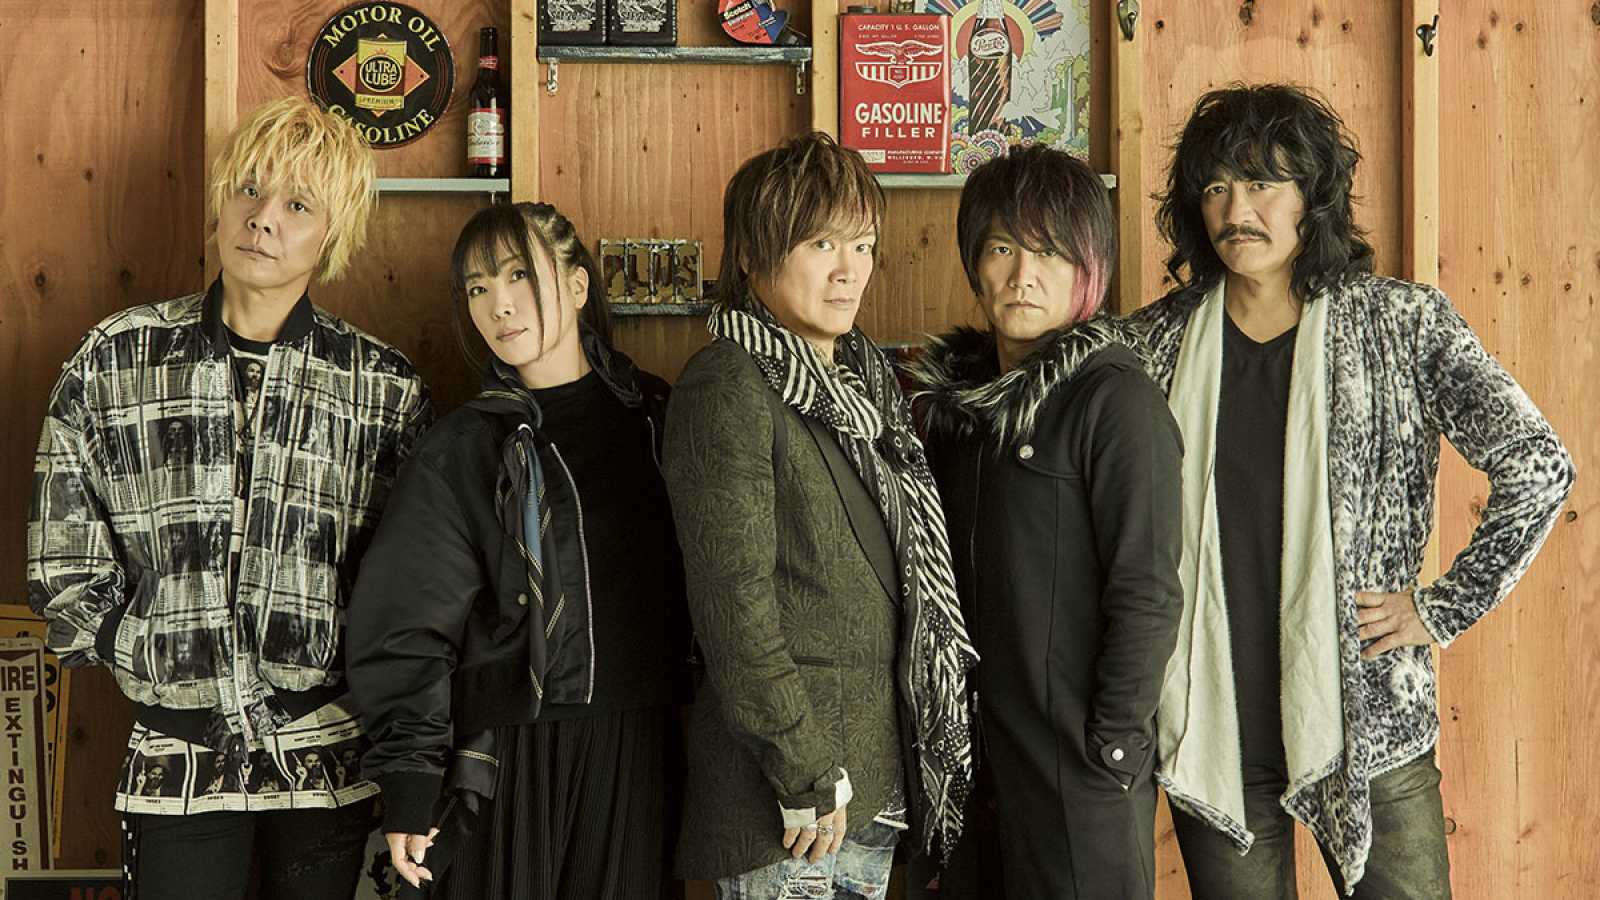 JAM Project enfin dispo sur Spotify © JAM Project/Lantis. All rights reserved.